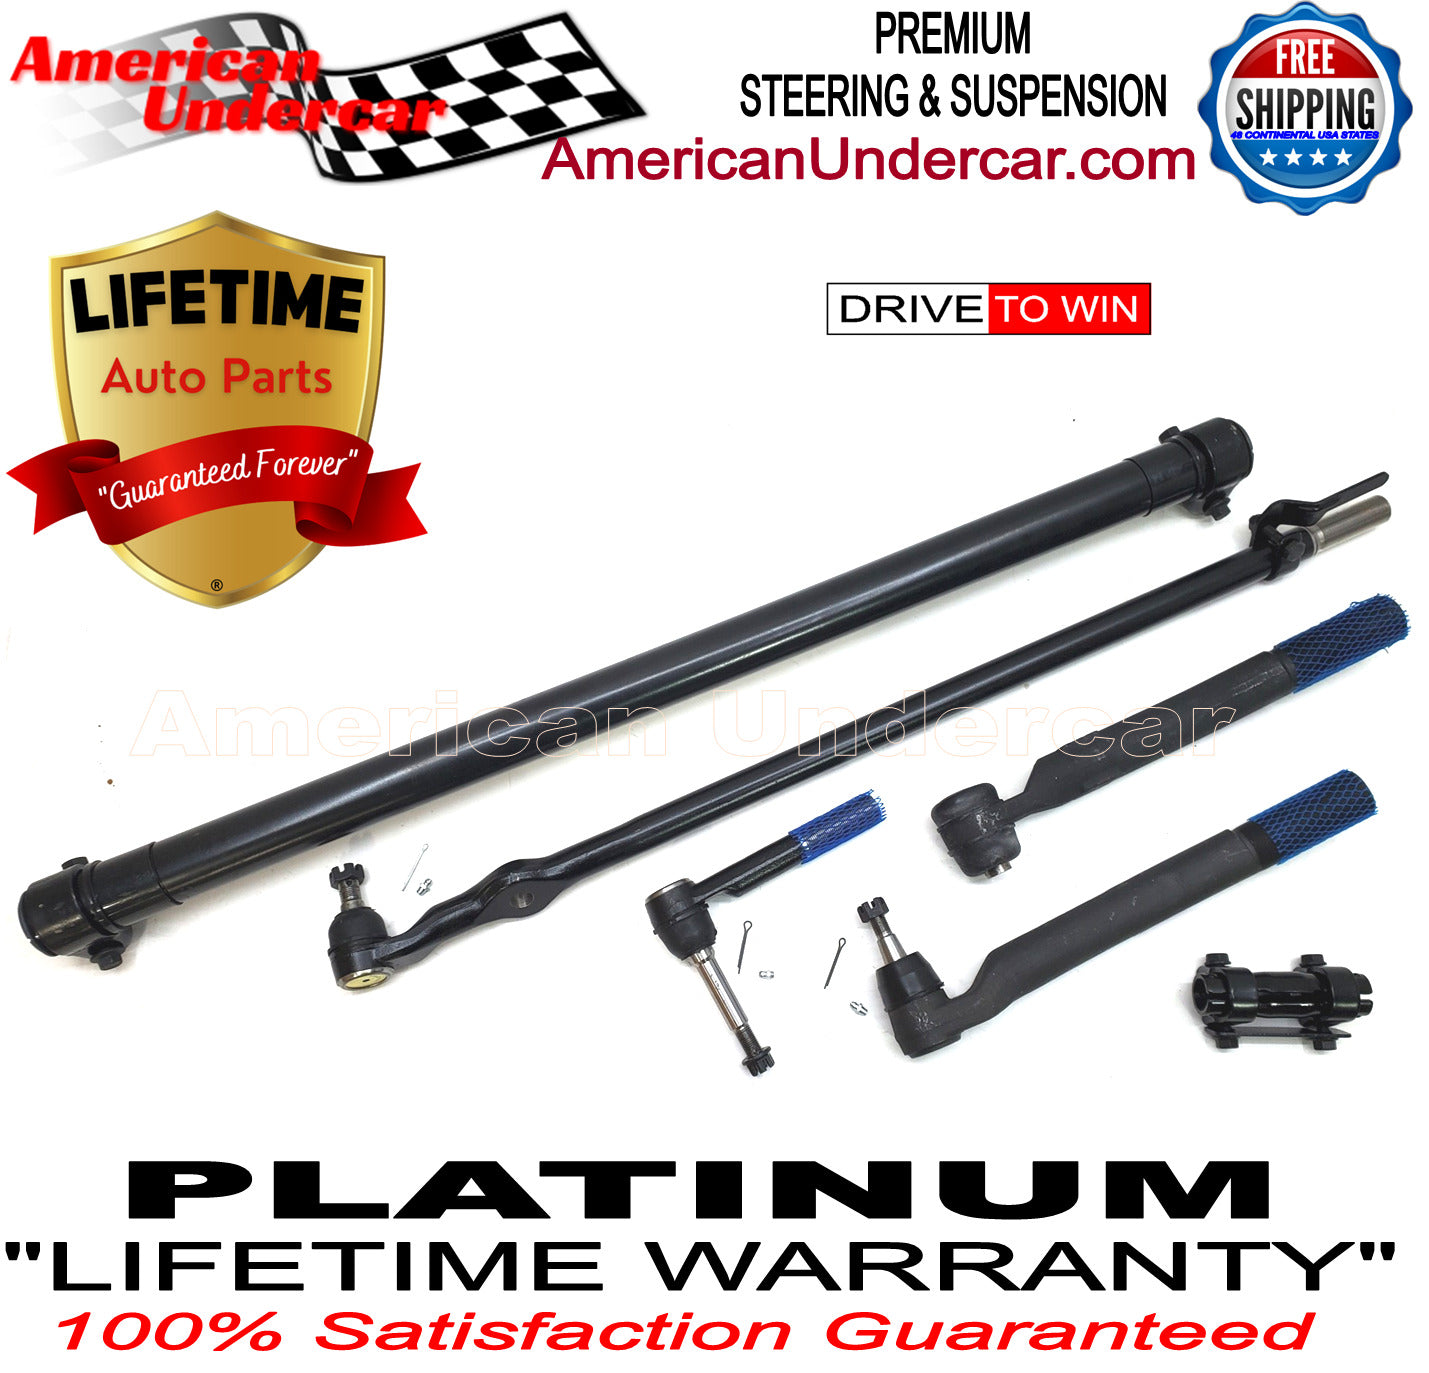 Lifetime Duty Steering and Suspension Kit for 2011-2016 Ford F550 Super 4x4